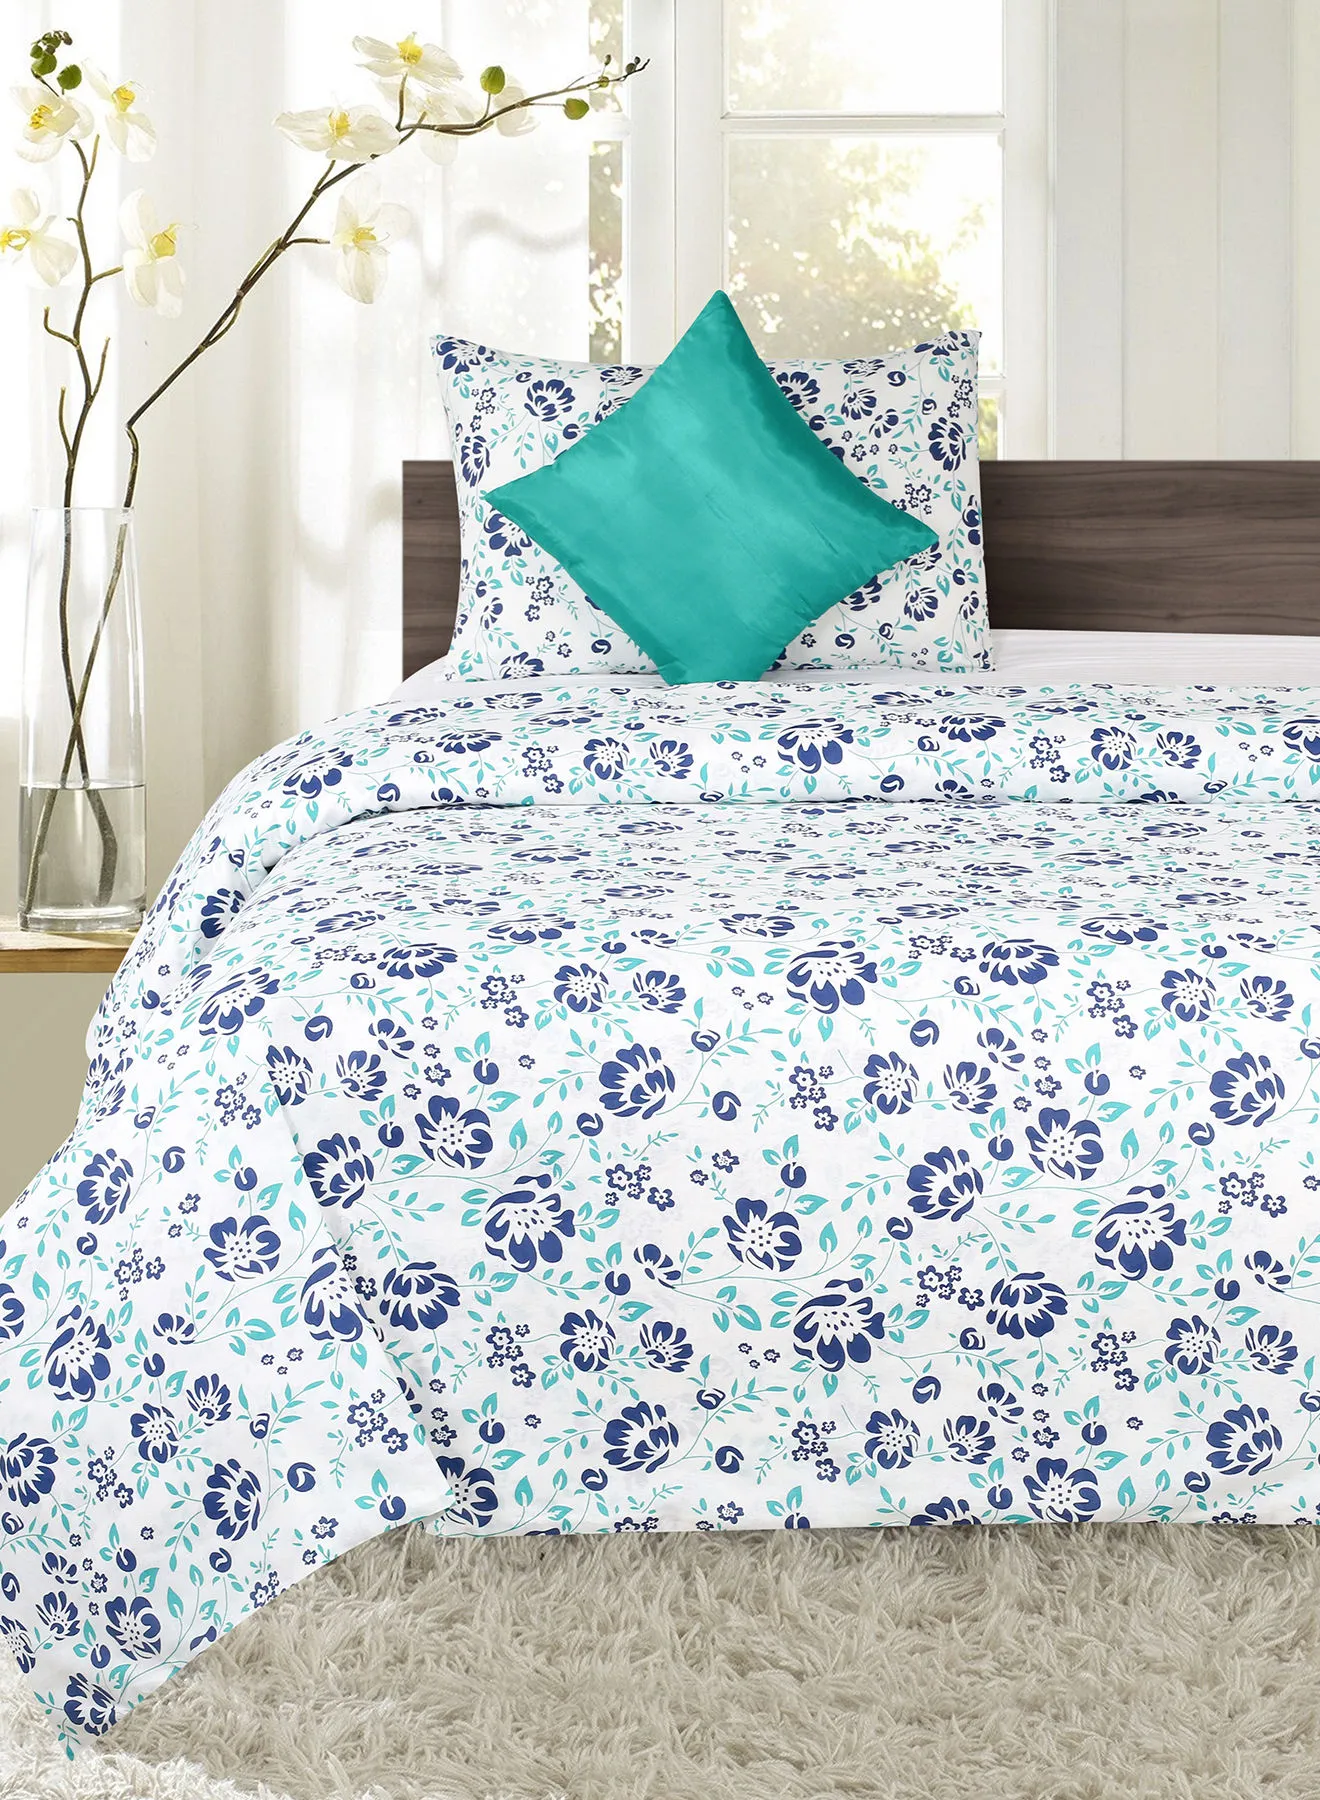 Amal Duvet Cover - With Pillow Cover 50X75 Cm, Comforter 150X210 Cm, 40X40 - For Twin Size Mattress - Blue/White/Green Microfiber Duvet - 100% Cotton 144 Thread Count